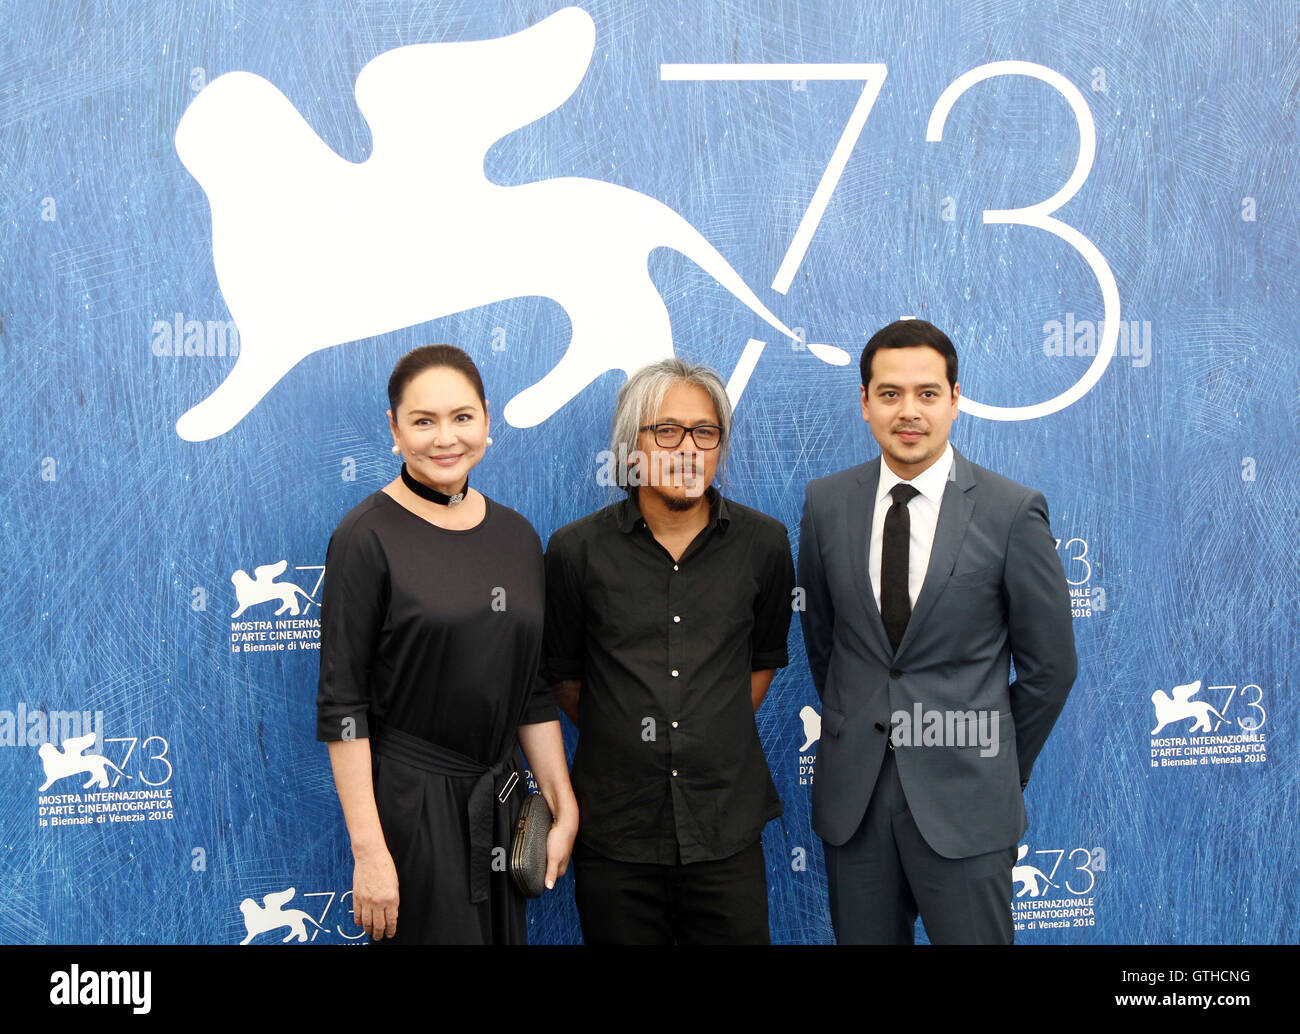 Venice, Italy. 09th Sep, 2016. Actress Charo Santos-Concio (L) and actor John Lloyd Cruz (R) with director Lav Diaz (C) attends 'Ang Babaeng Humayo (The Woman who left)' Photocall during the 73rd Venice Film Festival. Credit:  Andrea Spinelli/Pacific Press/Alamy Live News Stock Photo